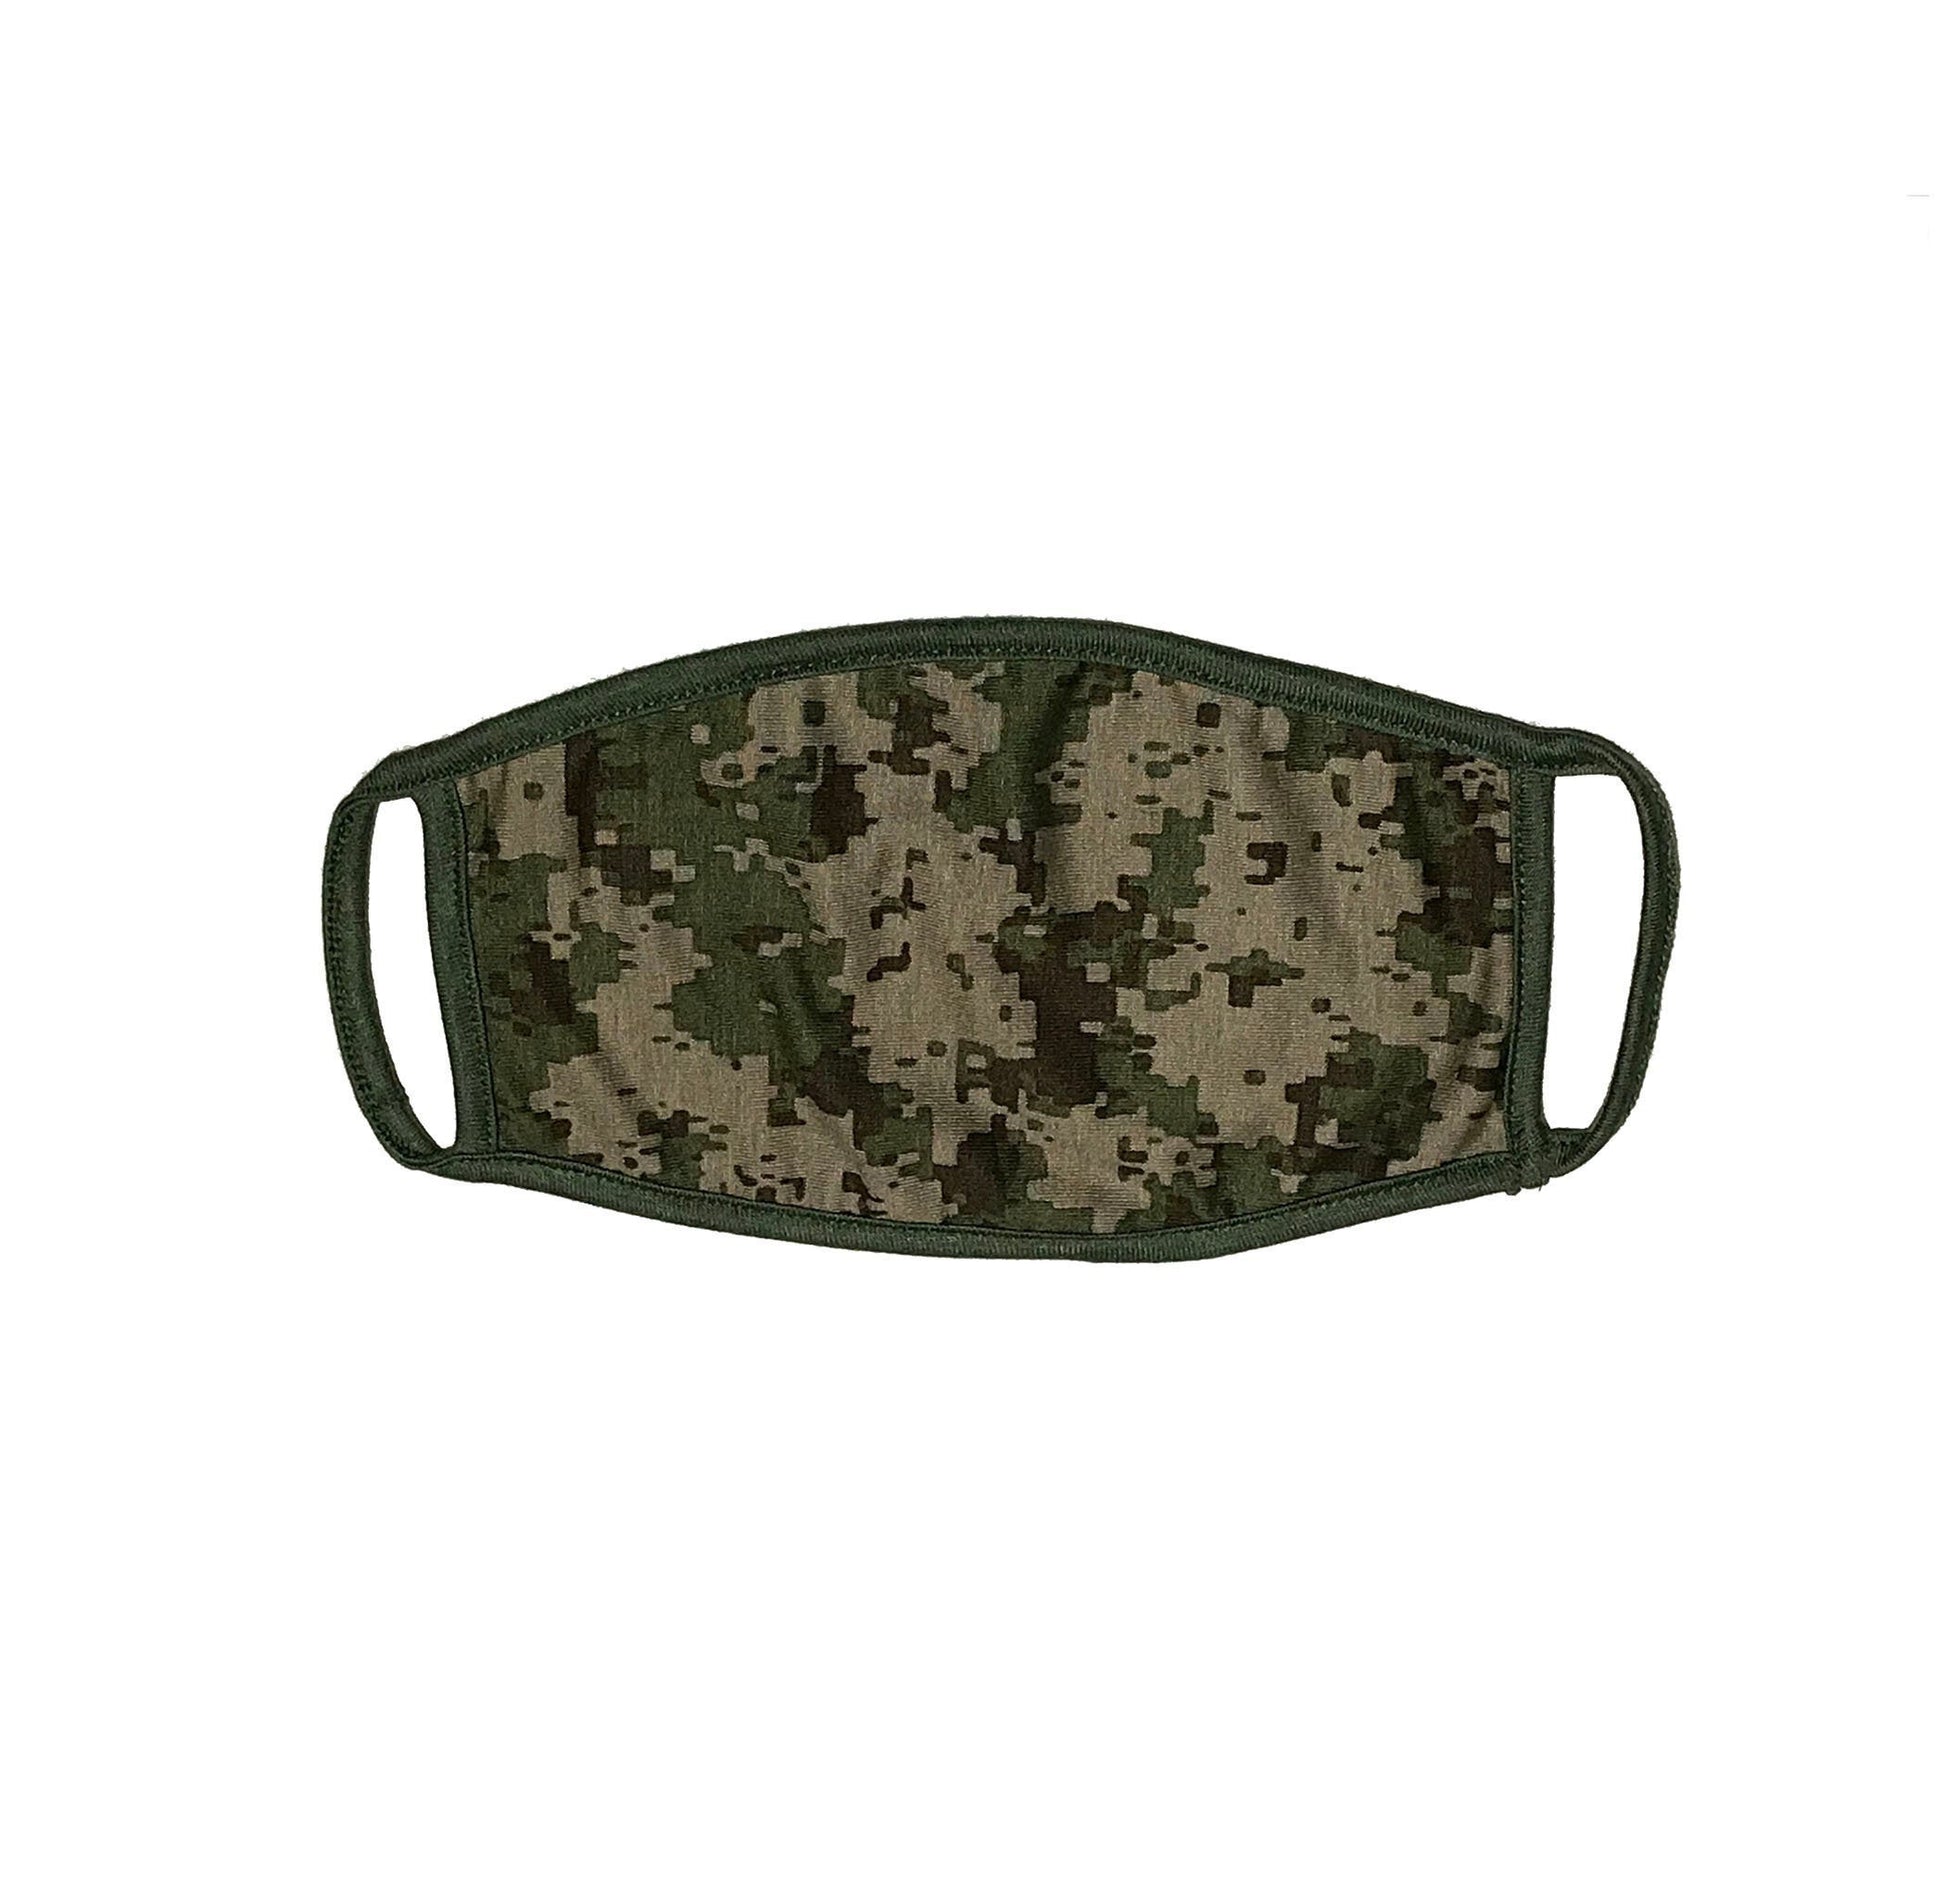 Reusabe Digital Camo Face Mask, 2 PLY, Washable & Durable